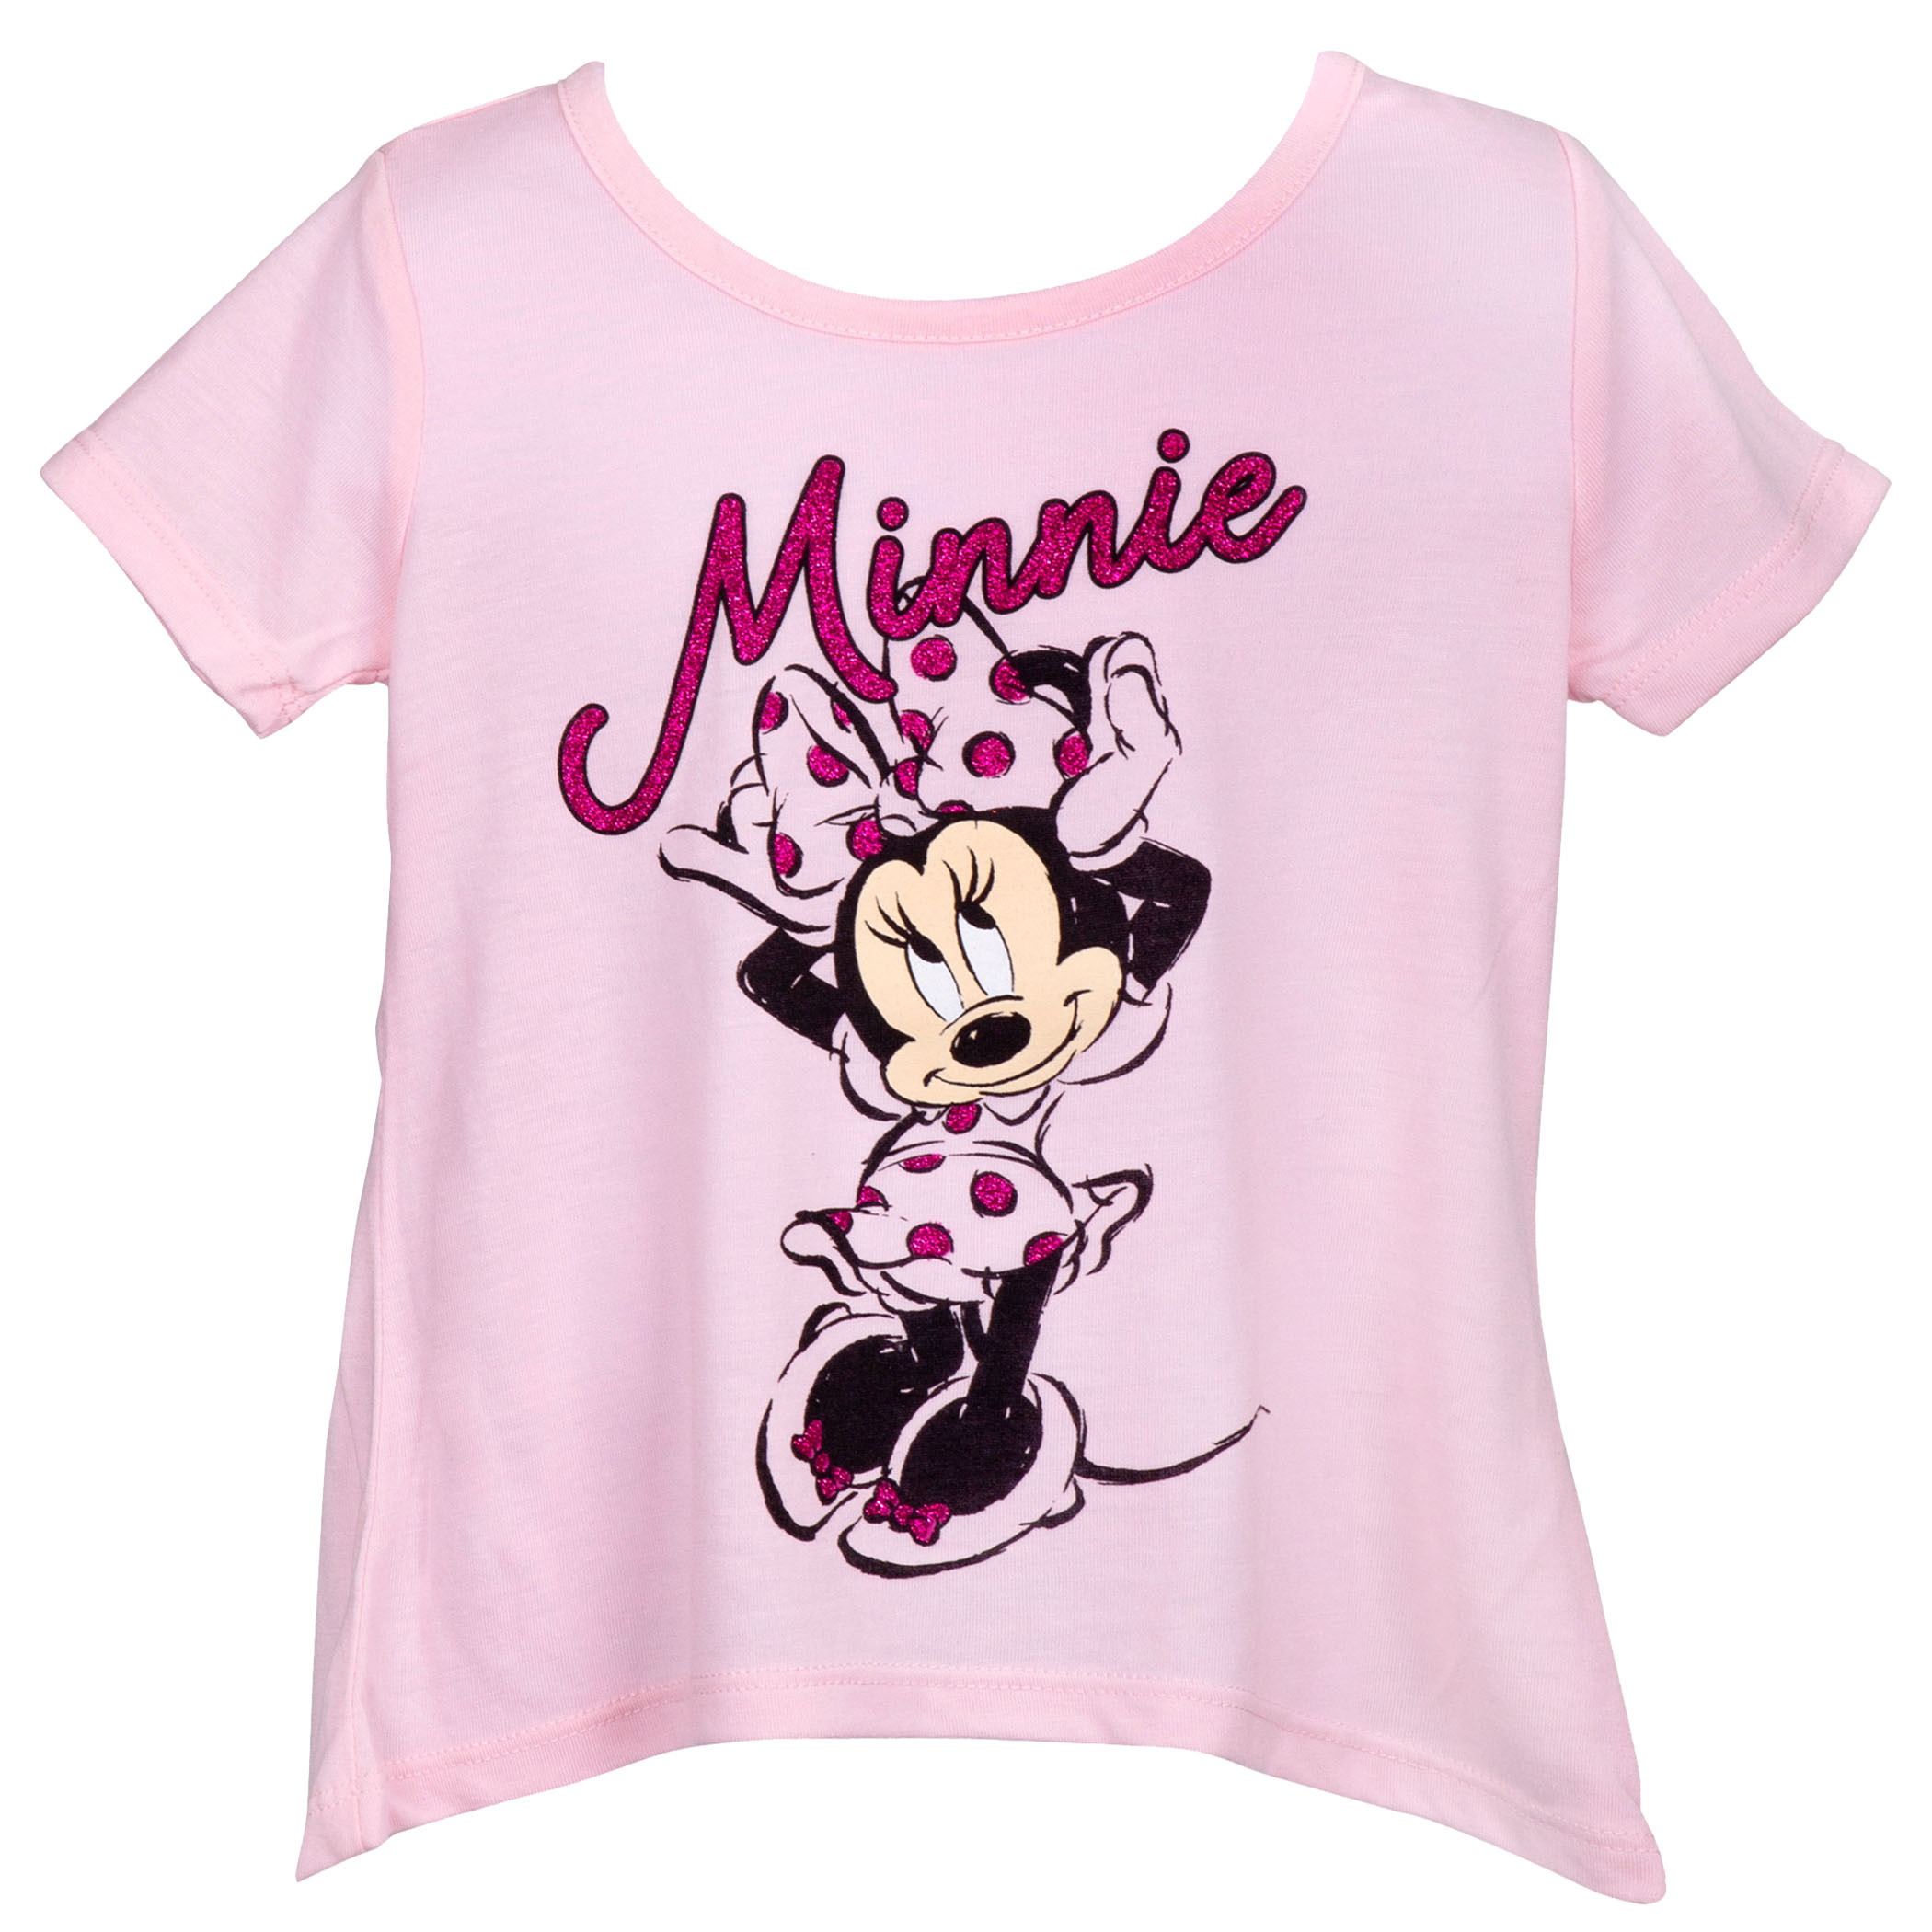 DISNEY Really Cute Fluorescent Pink Minnie Mouse Top NWT 